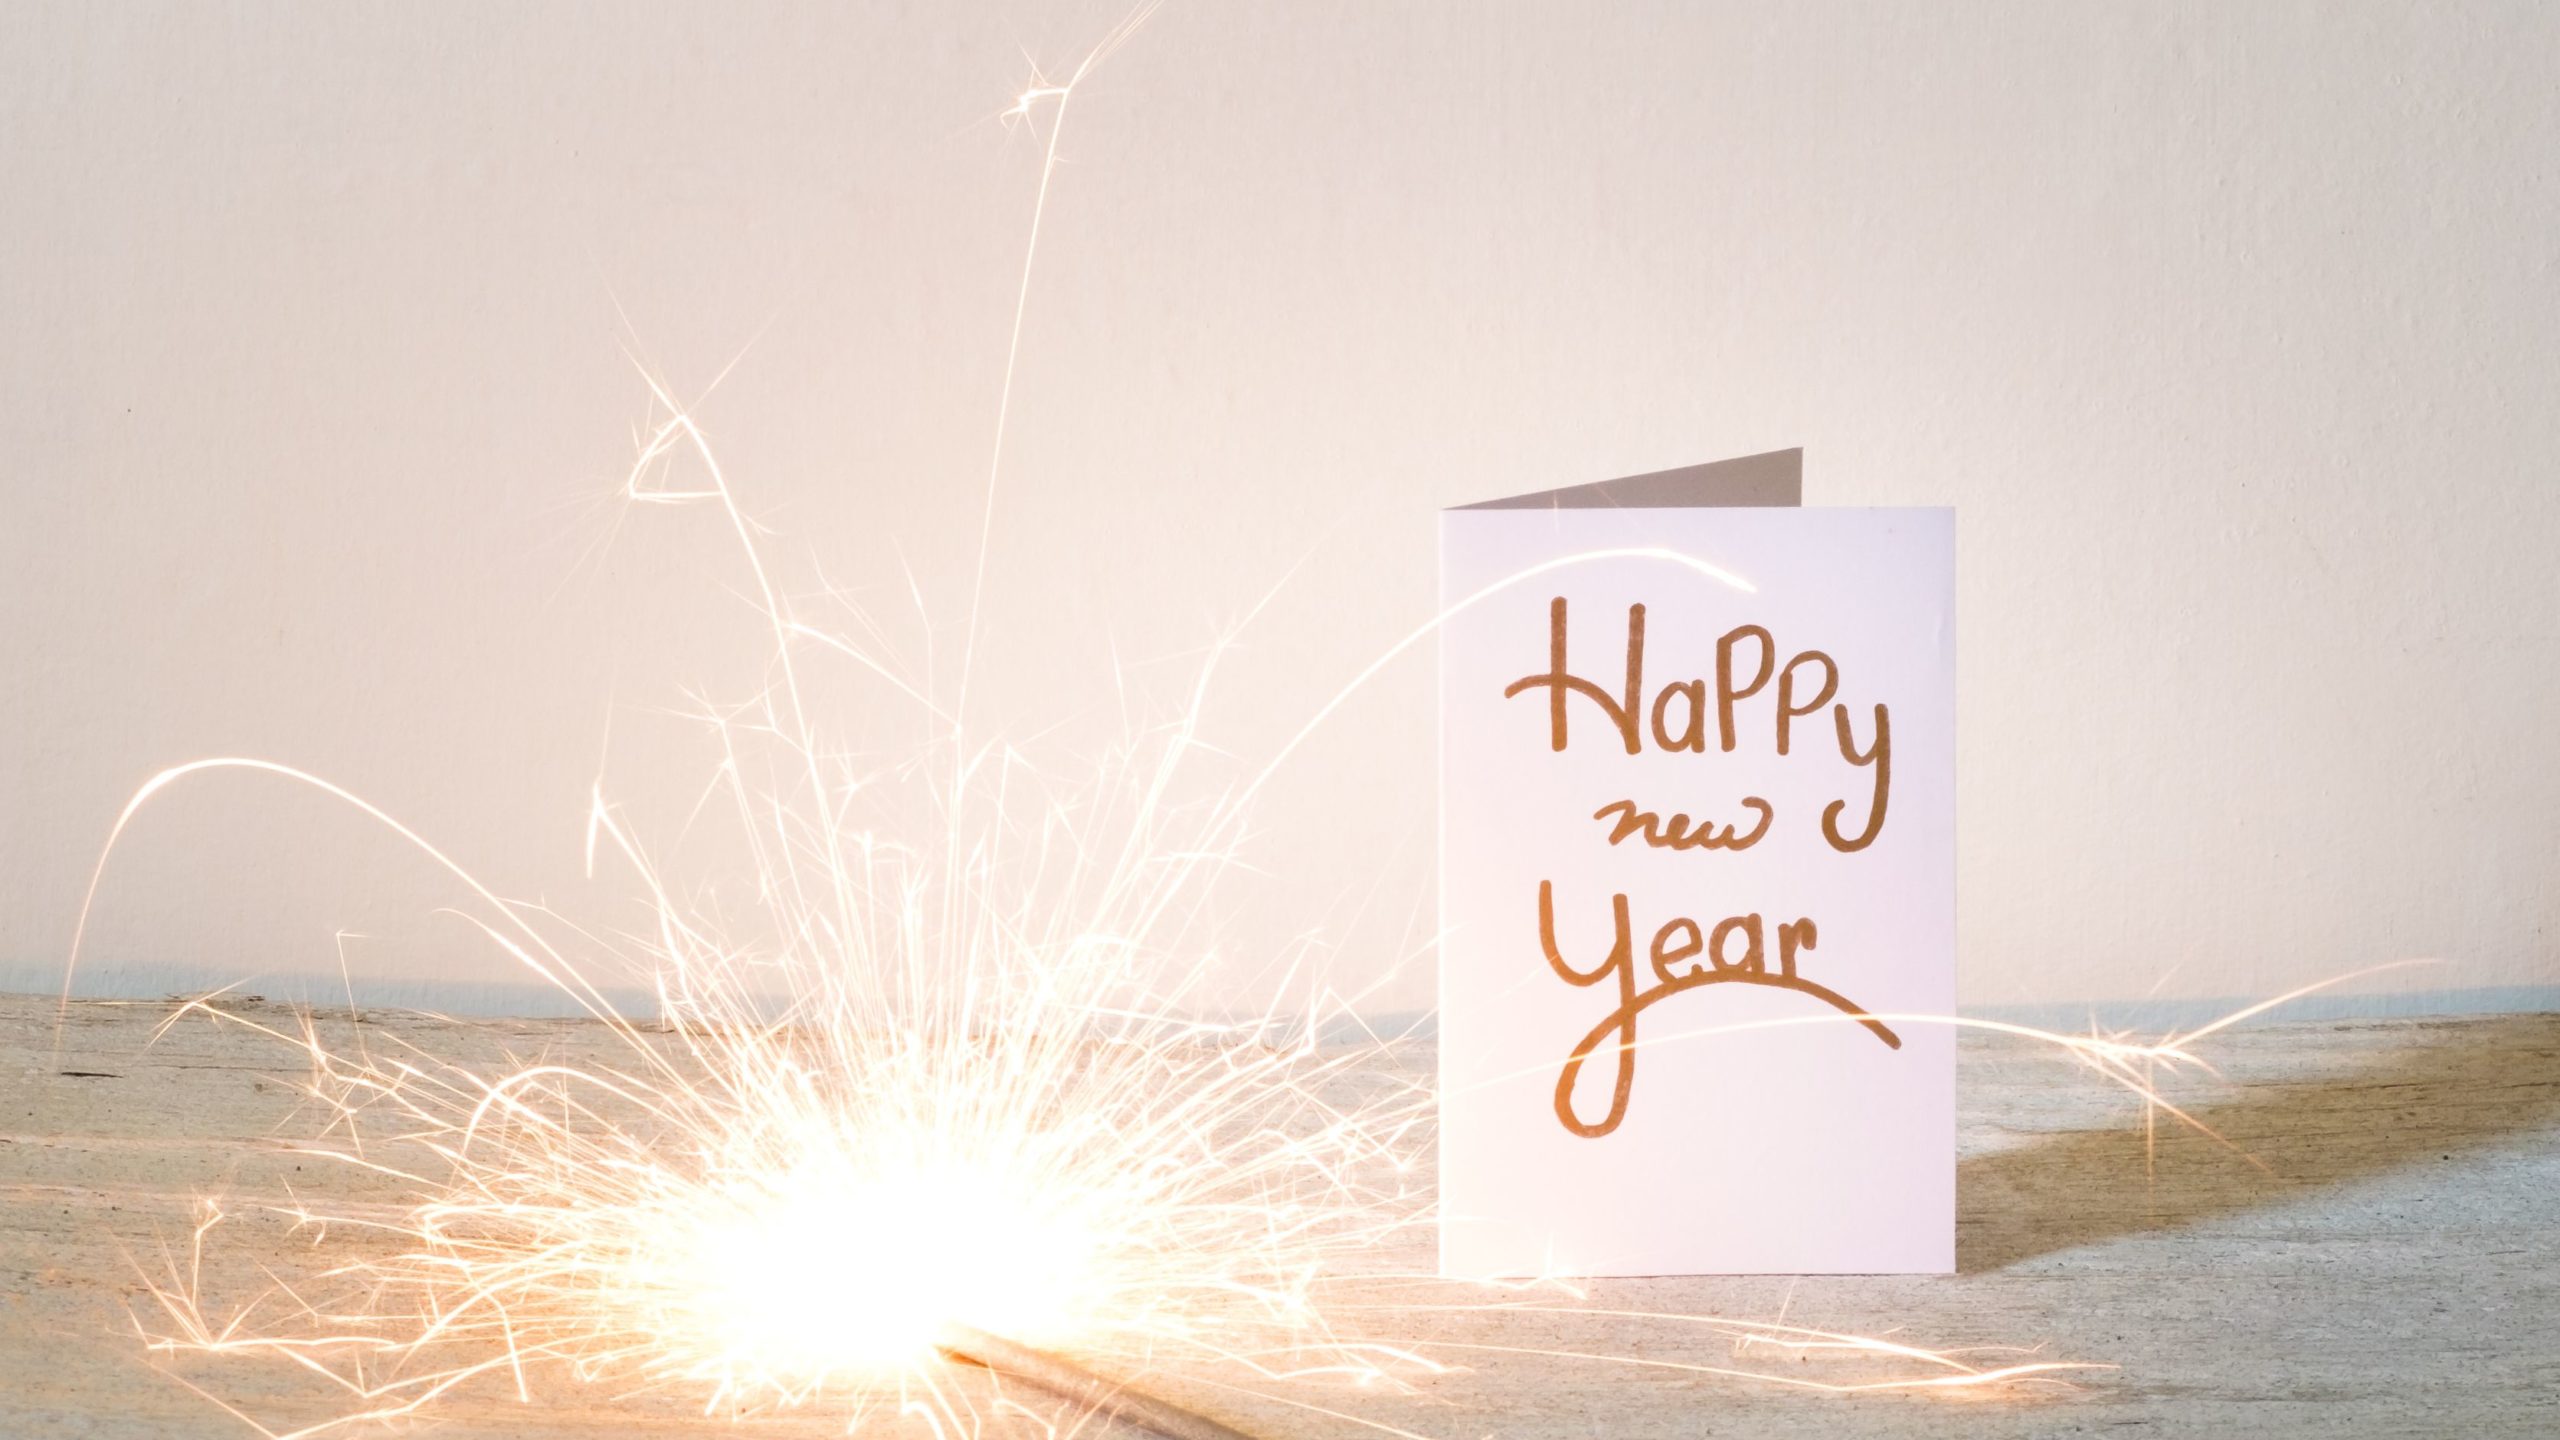 new-year-card-with-lit-sparkler-on-table-against-wall-688969401-5bd668bc46e0fb0026718605